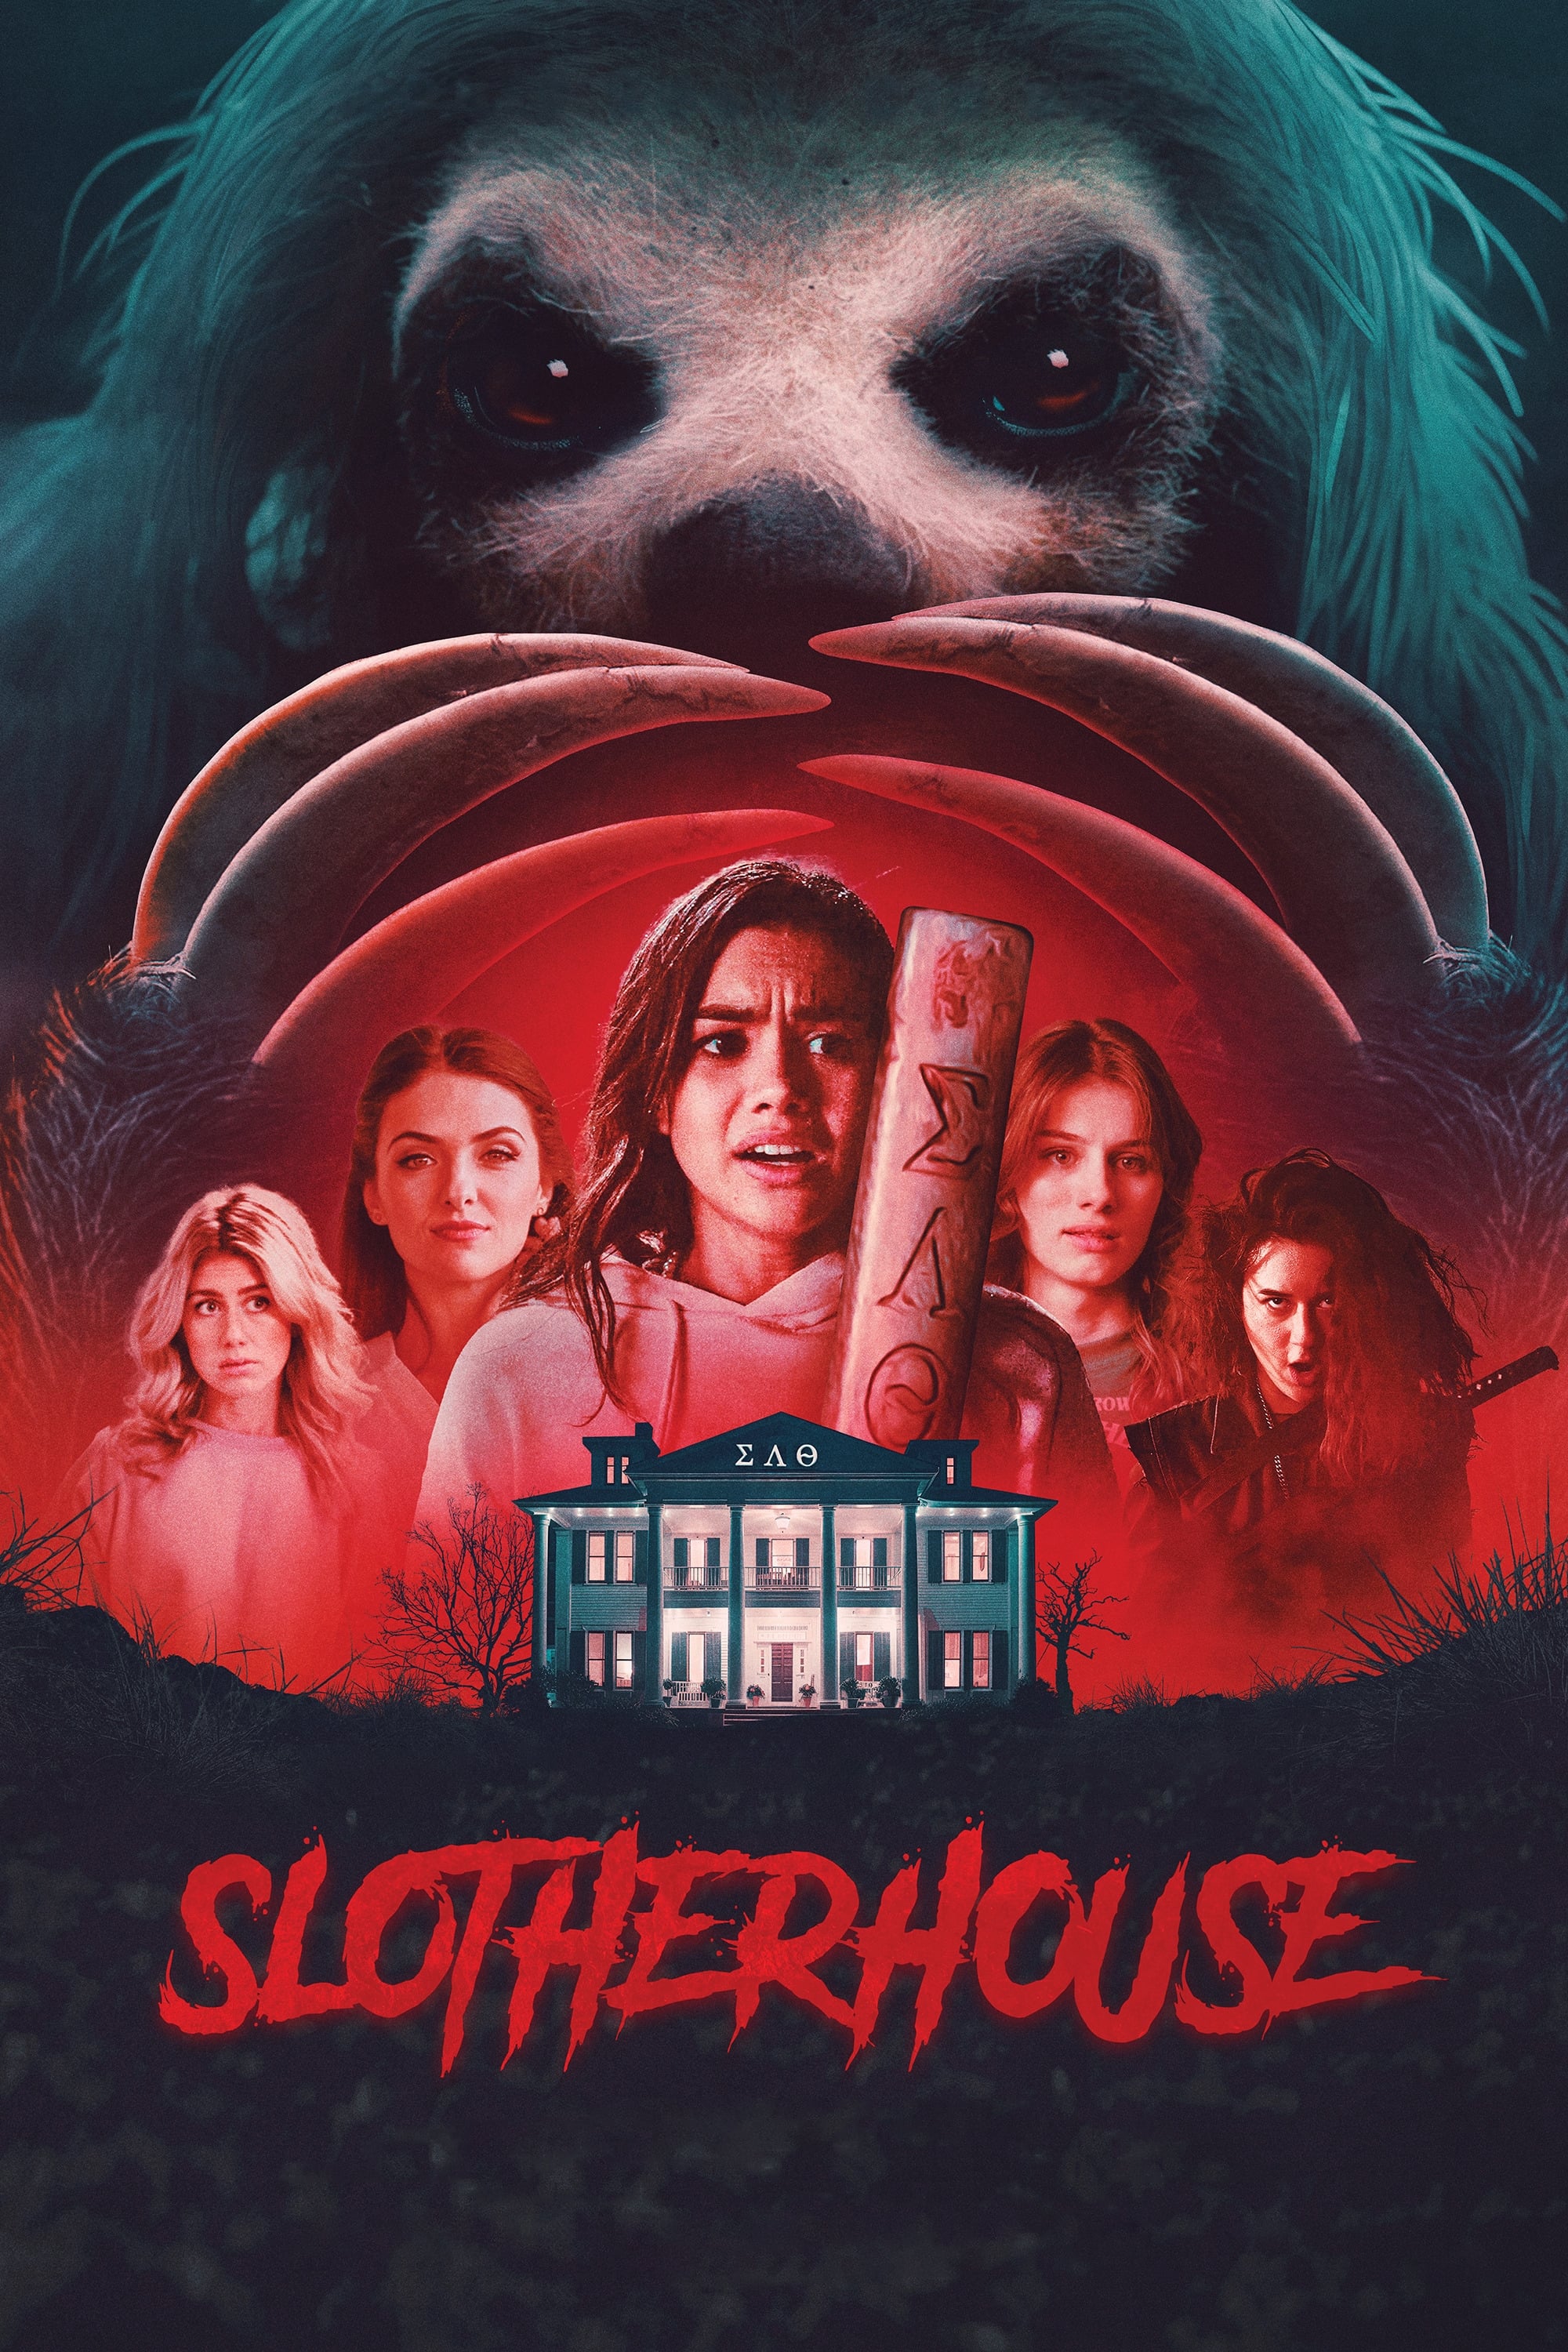 [WATCH 86+] Slotherhouse (2023) FULL MOVIE ONLINE FREE ENGLISH/Dub/SUB Comedy STREAMINGS ������ Movie Poster